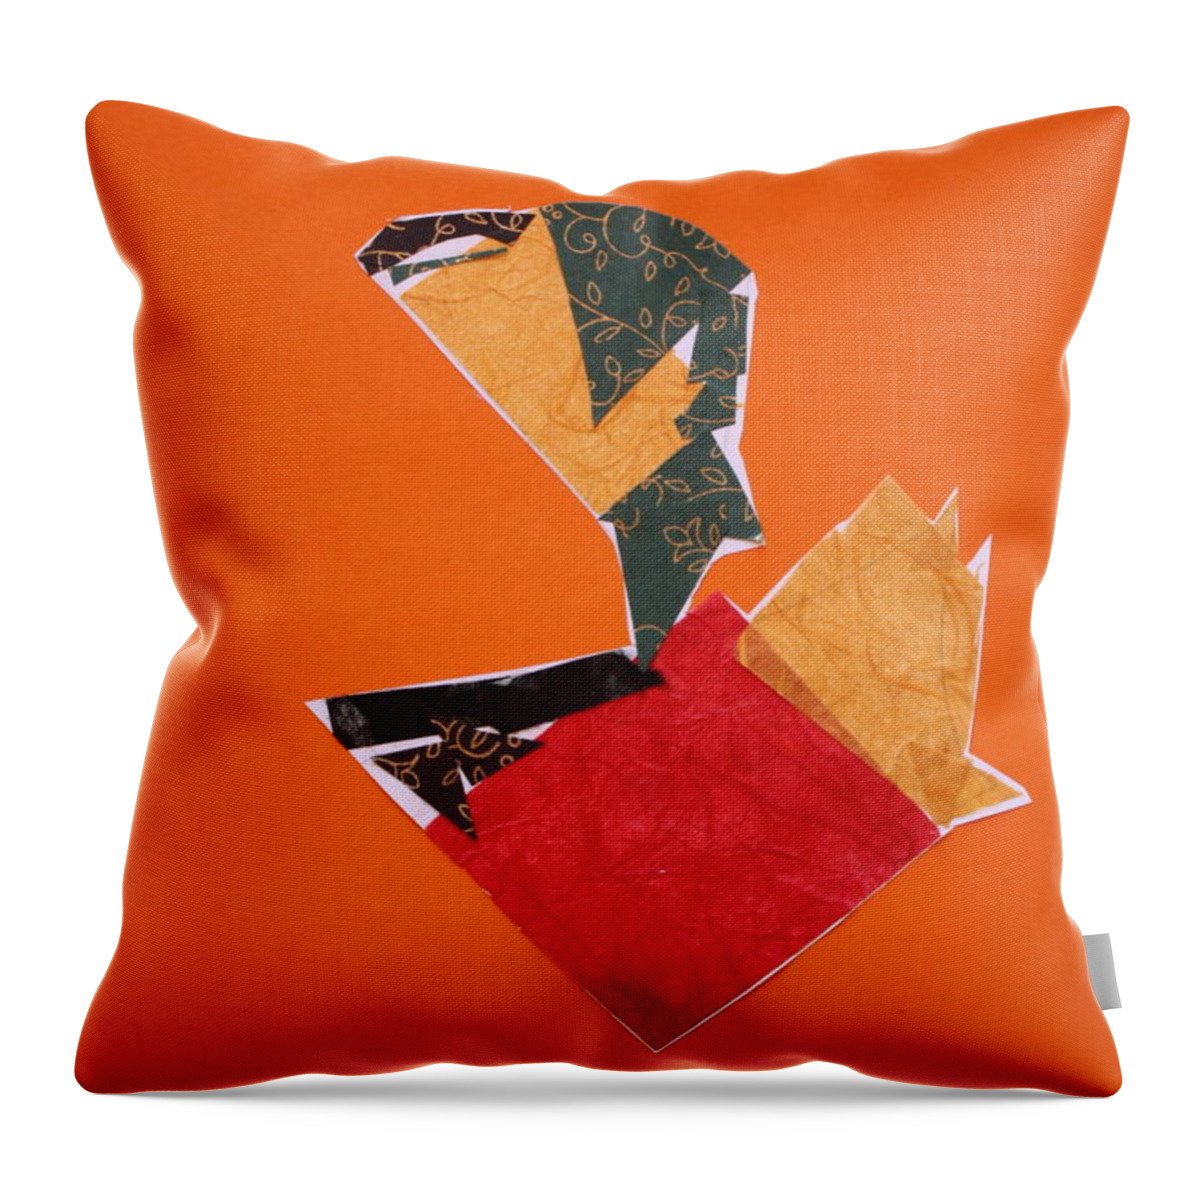 Collage Throw Pillow featuring the mixed media Collage 2 by Roger Cummiskey